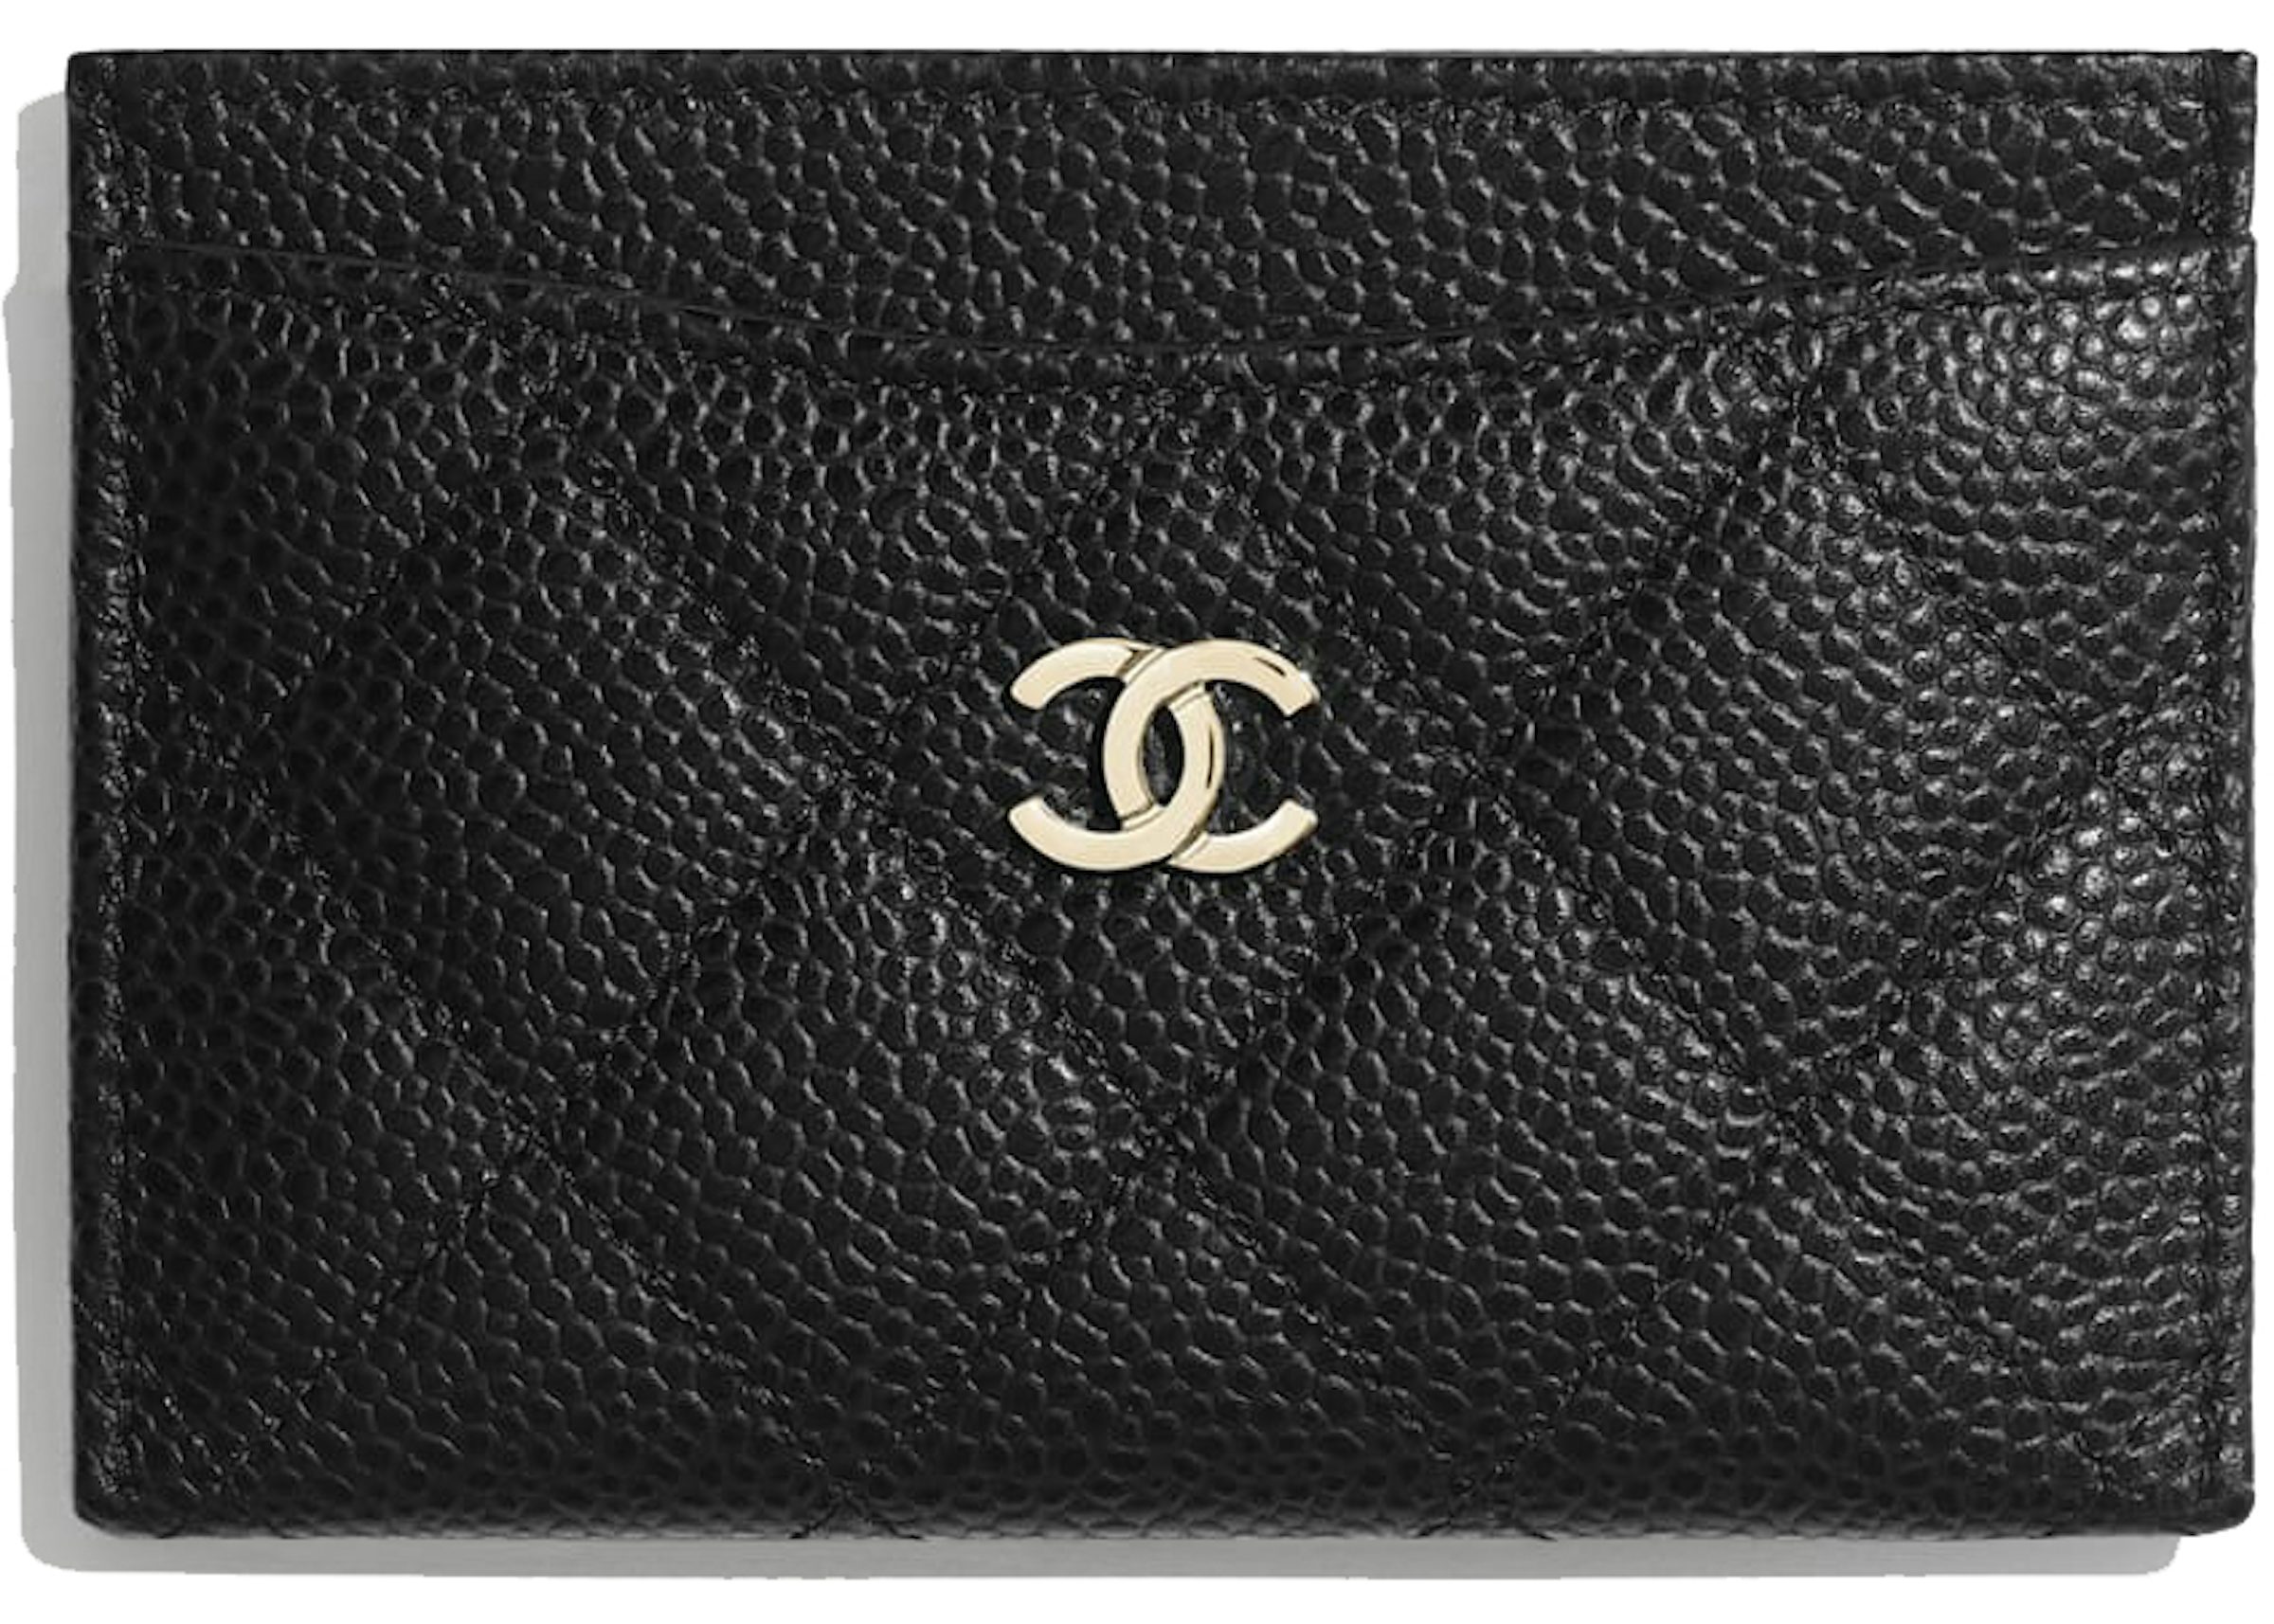 Replica Chanel Lambskin Flap Phone Holder with Chain with Imitation Pe